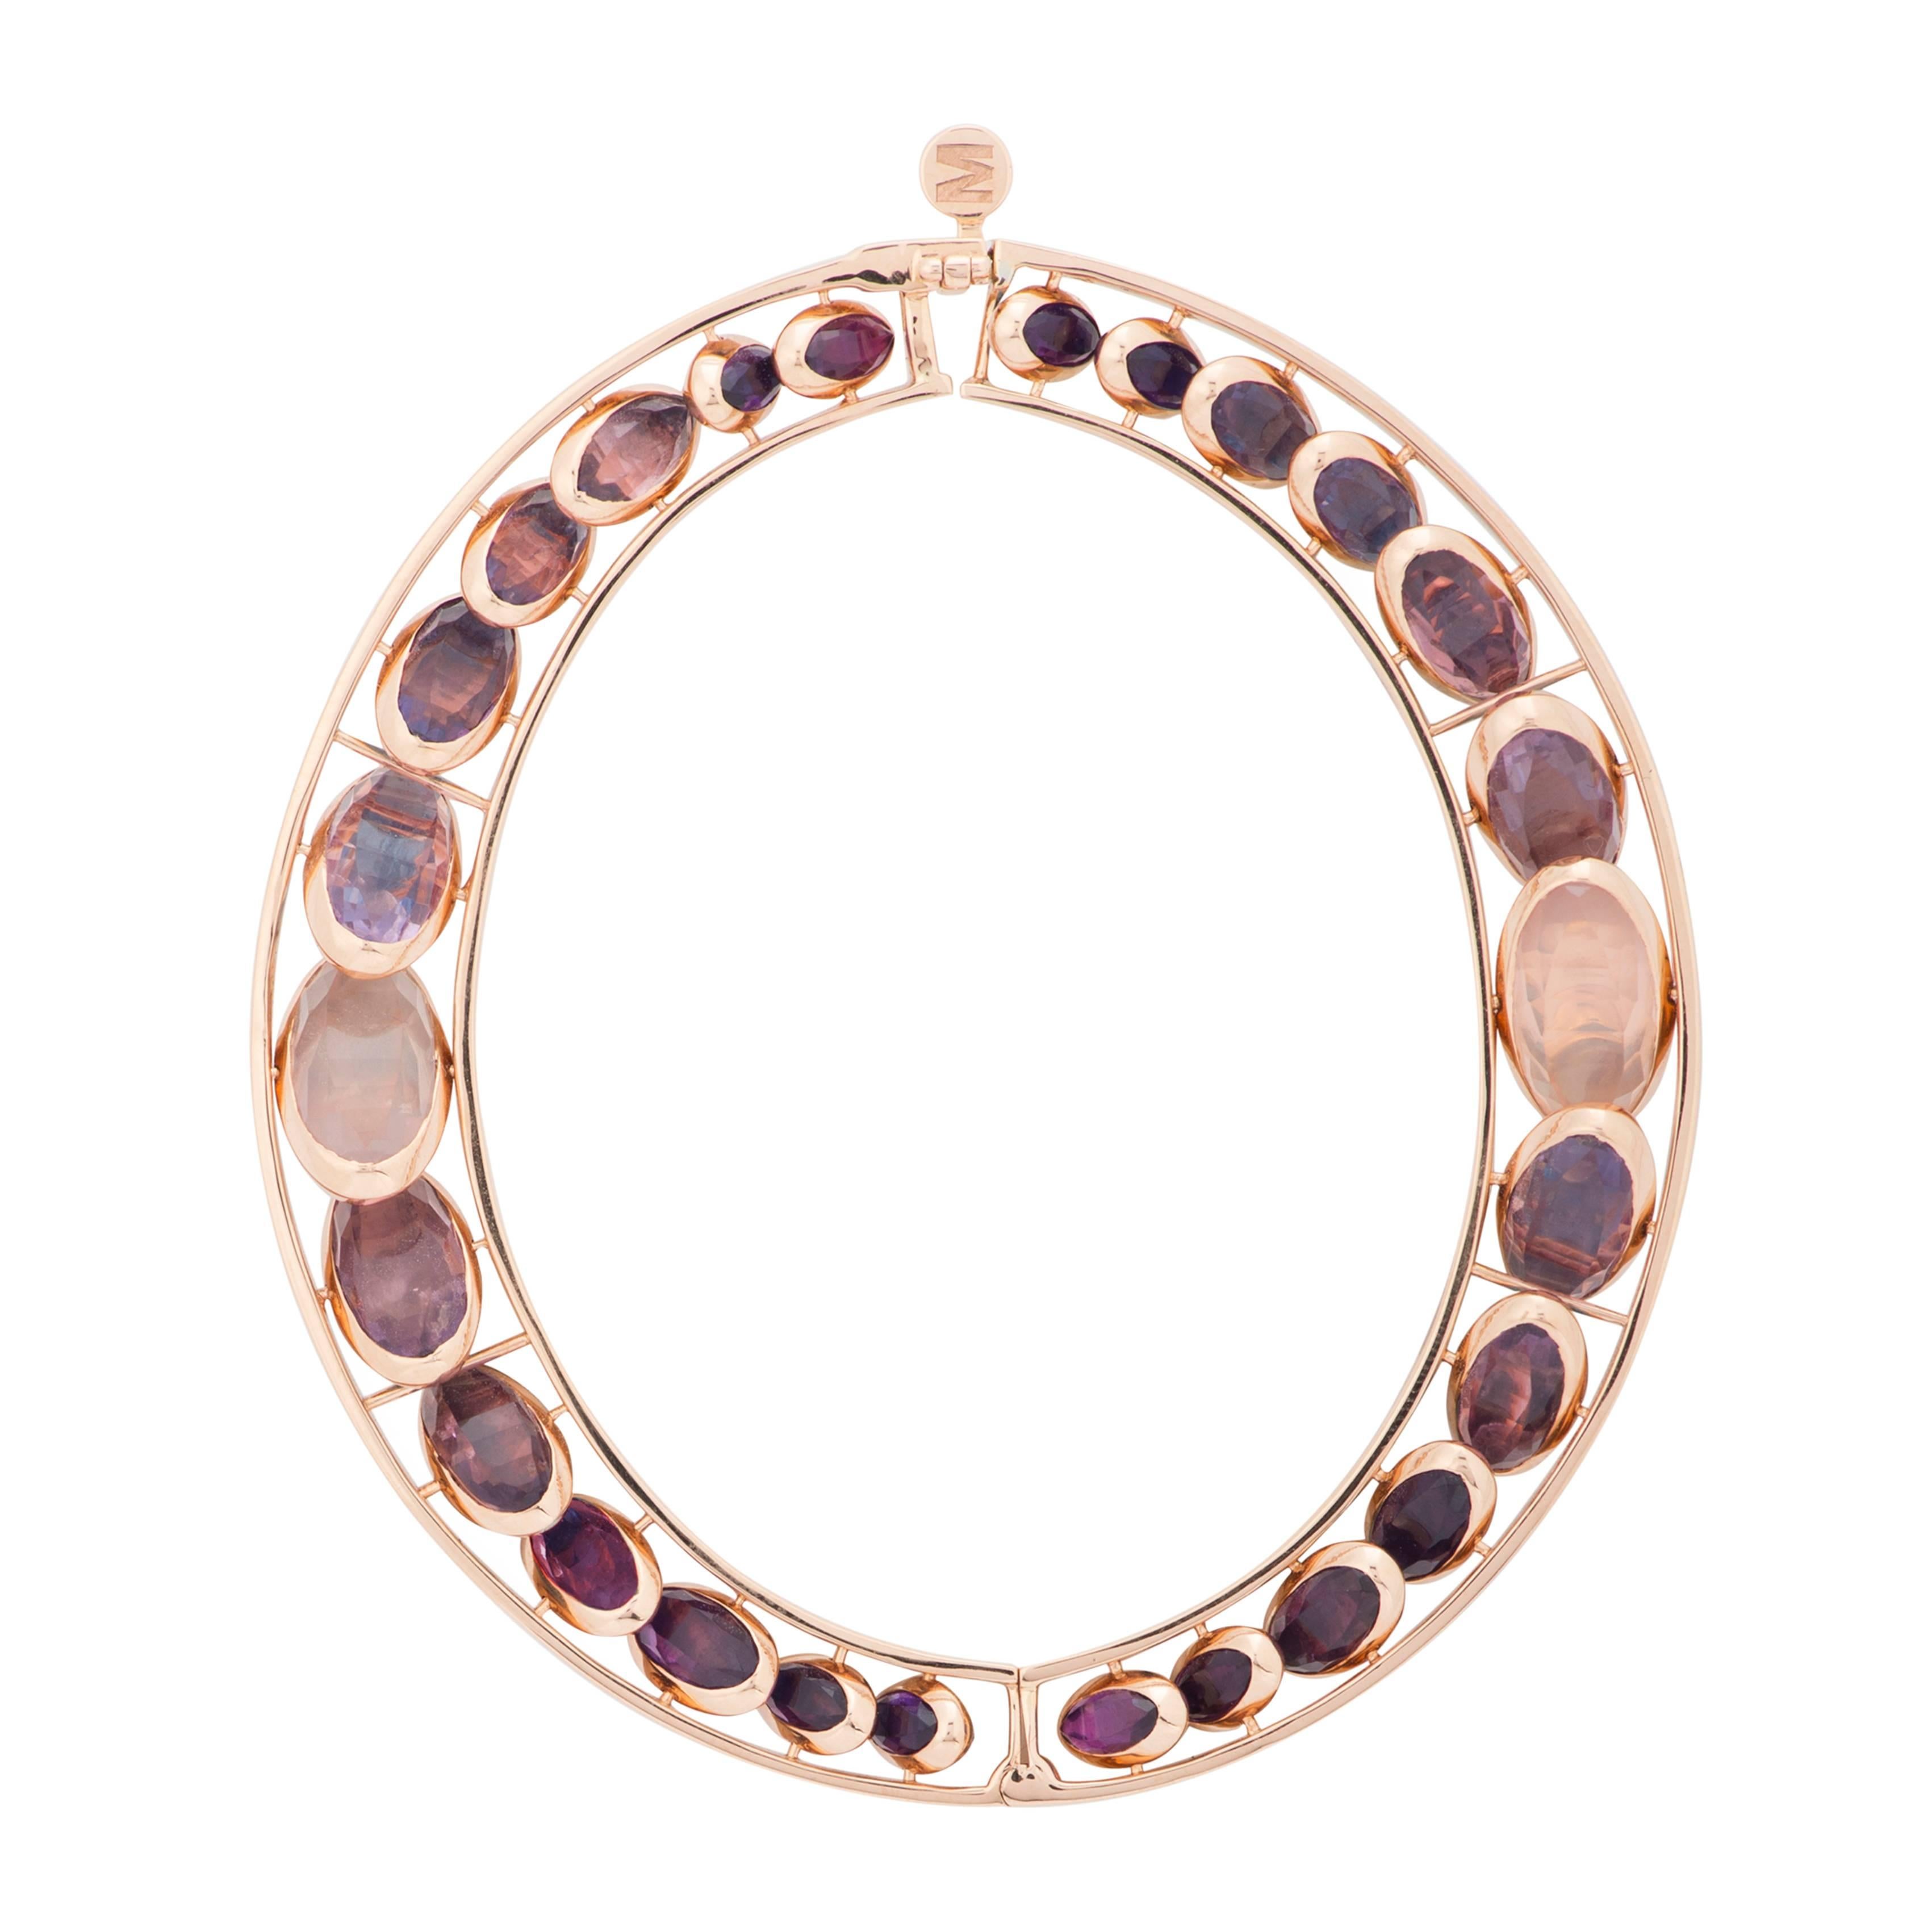 This Reversible Front Dancing Bracelet from the French Jewelry brand Marie Mas is made in 18 Karat Rose Gold (48 gr). All the stones can move like dominos, from one side to the other, from a shade of blue to a shade of pink. You can turn them to